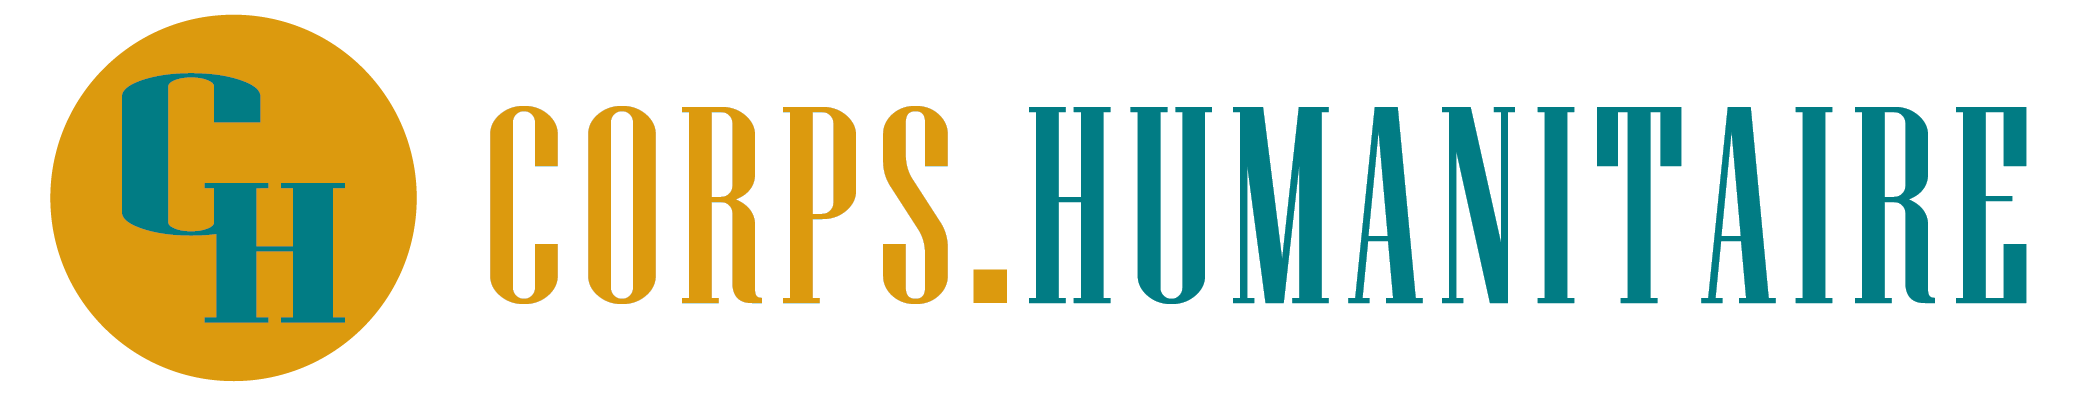 Corps_Humanitaire-Logo